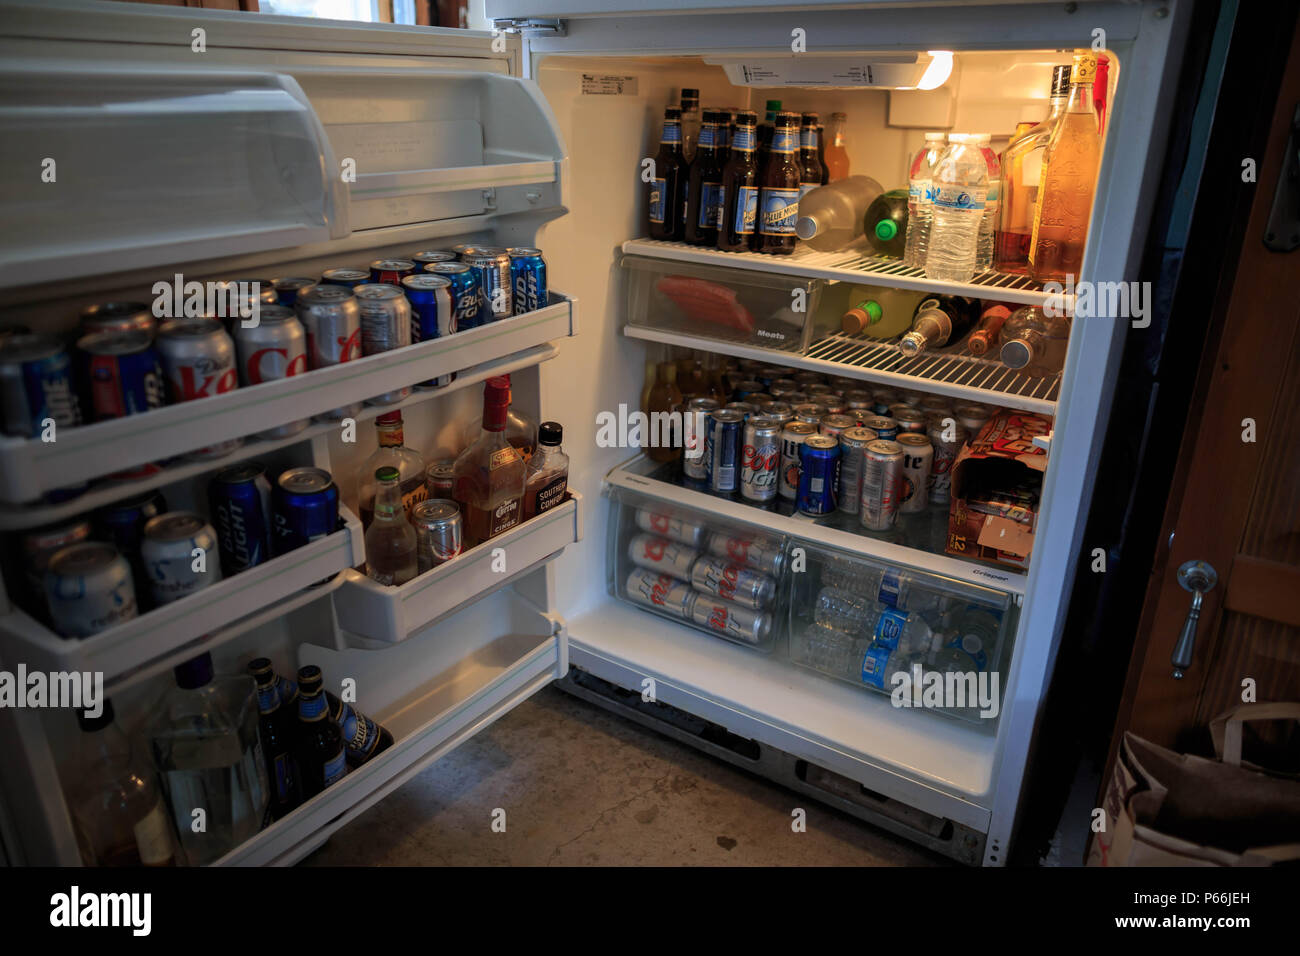 Faifrax, California - July 4, 2014: Beer and other drinks in fully stocked in preparation for Independence Day celebration Stock Photo